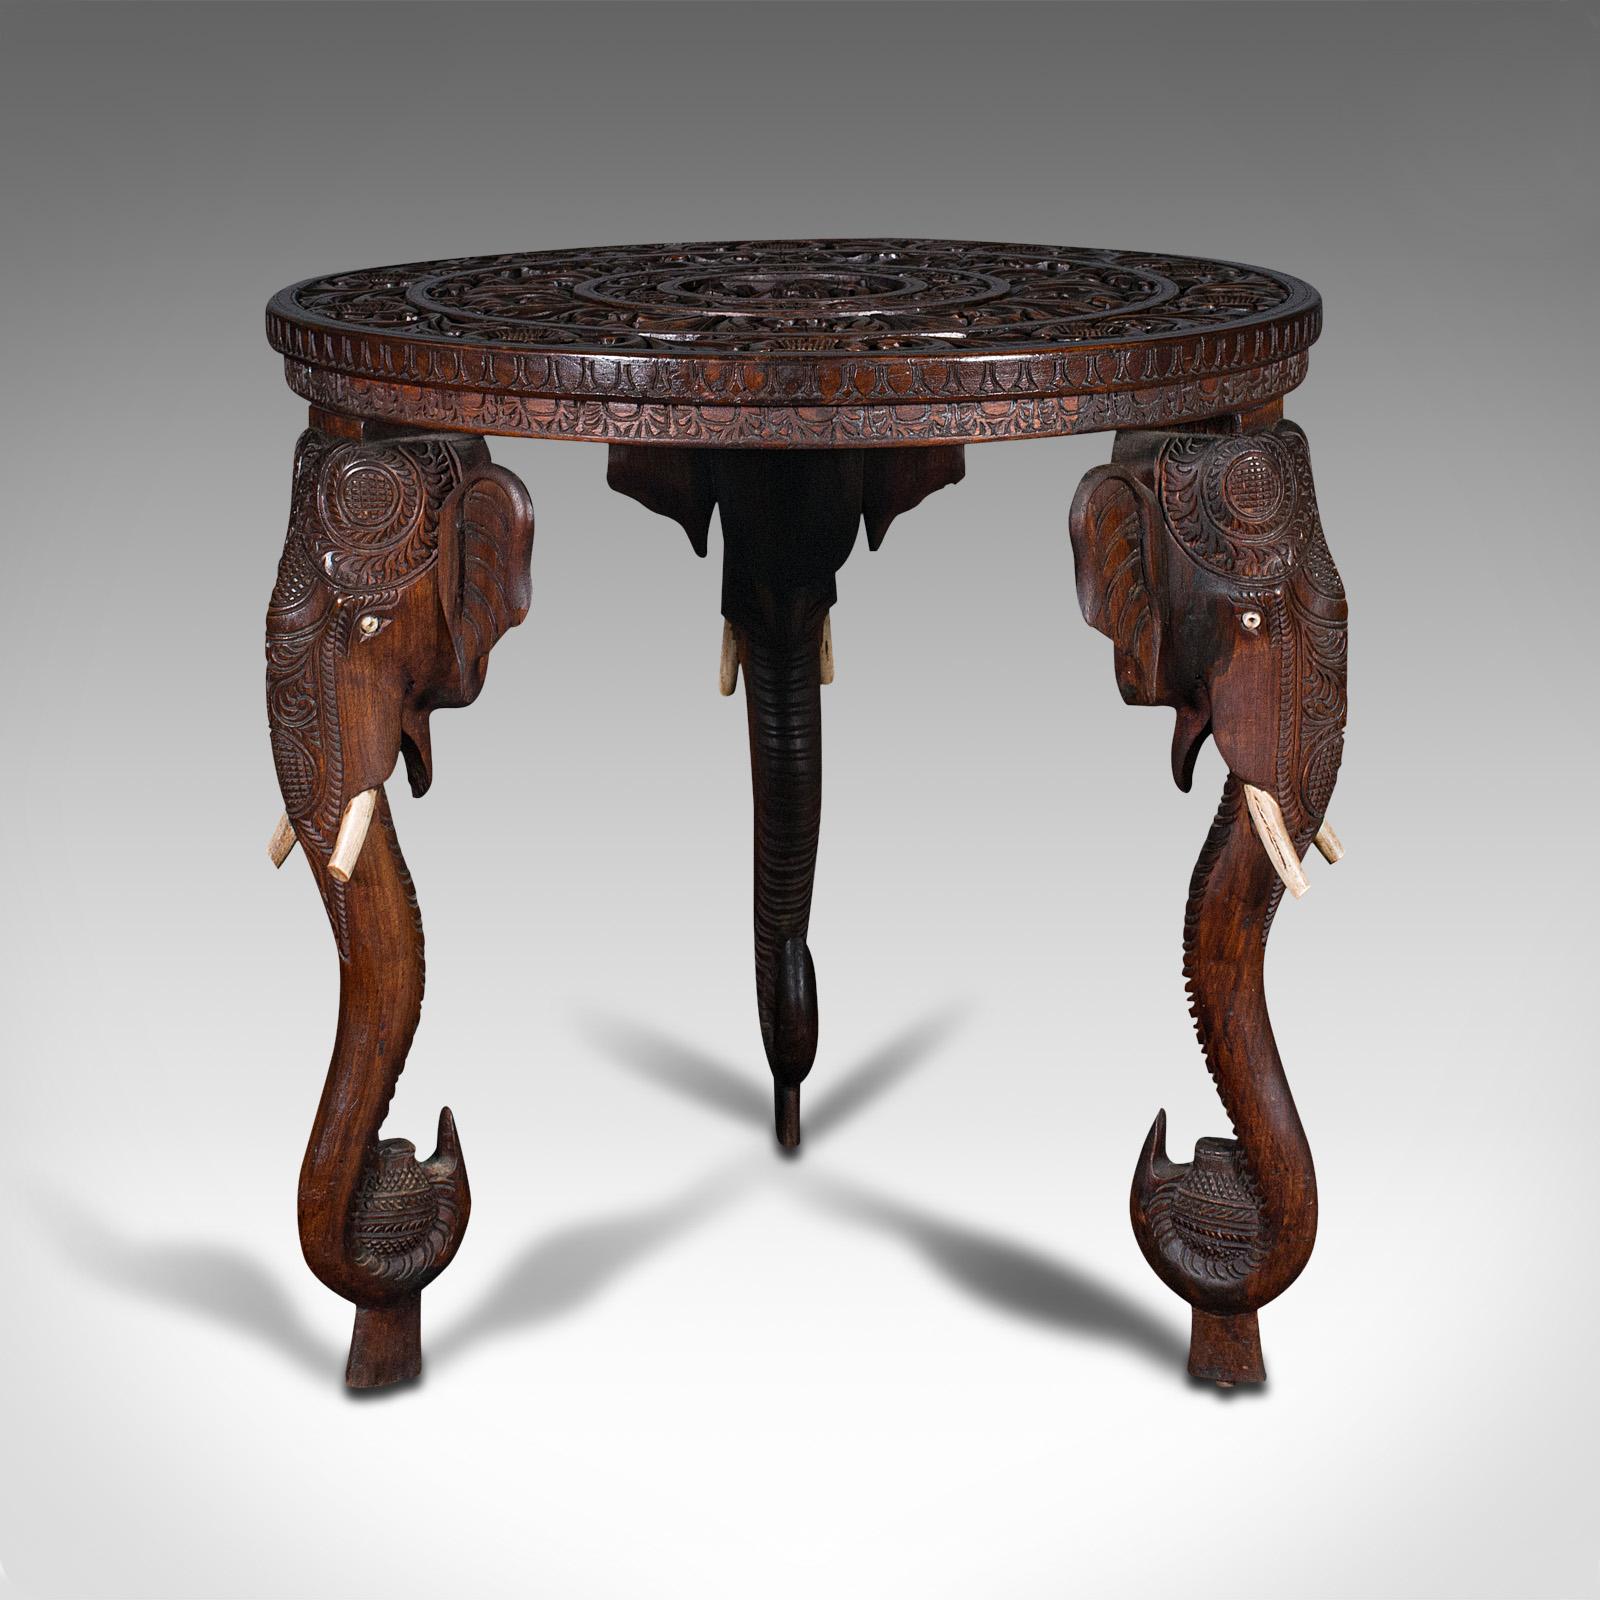 Antique Carved Circular Table, Indian, Teak, Colonial, Campaign, Victorian, 1900 1